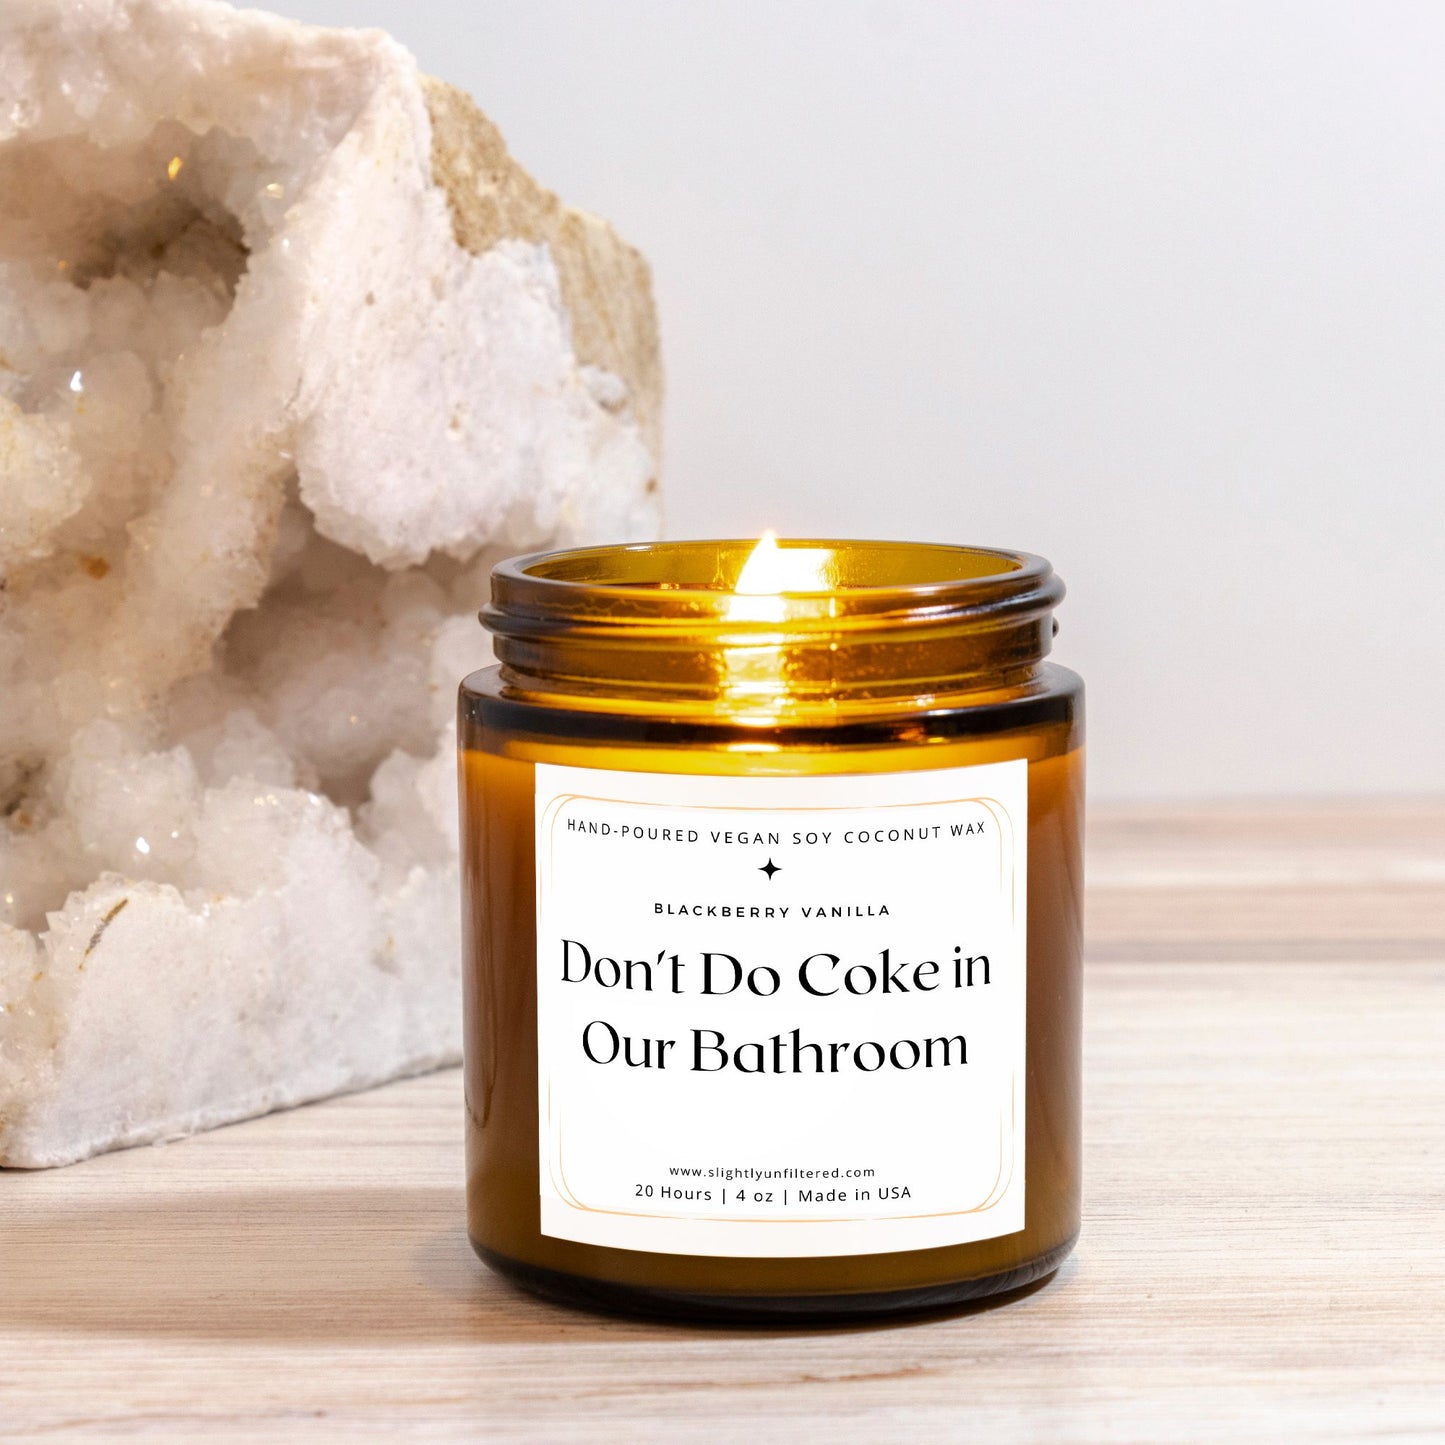 Don't Do Coke in Our Bathroom Blackberry Vanilla Candle - (Hand Poured 4 oz)